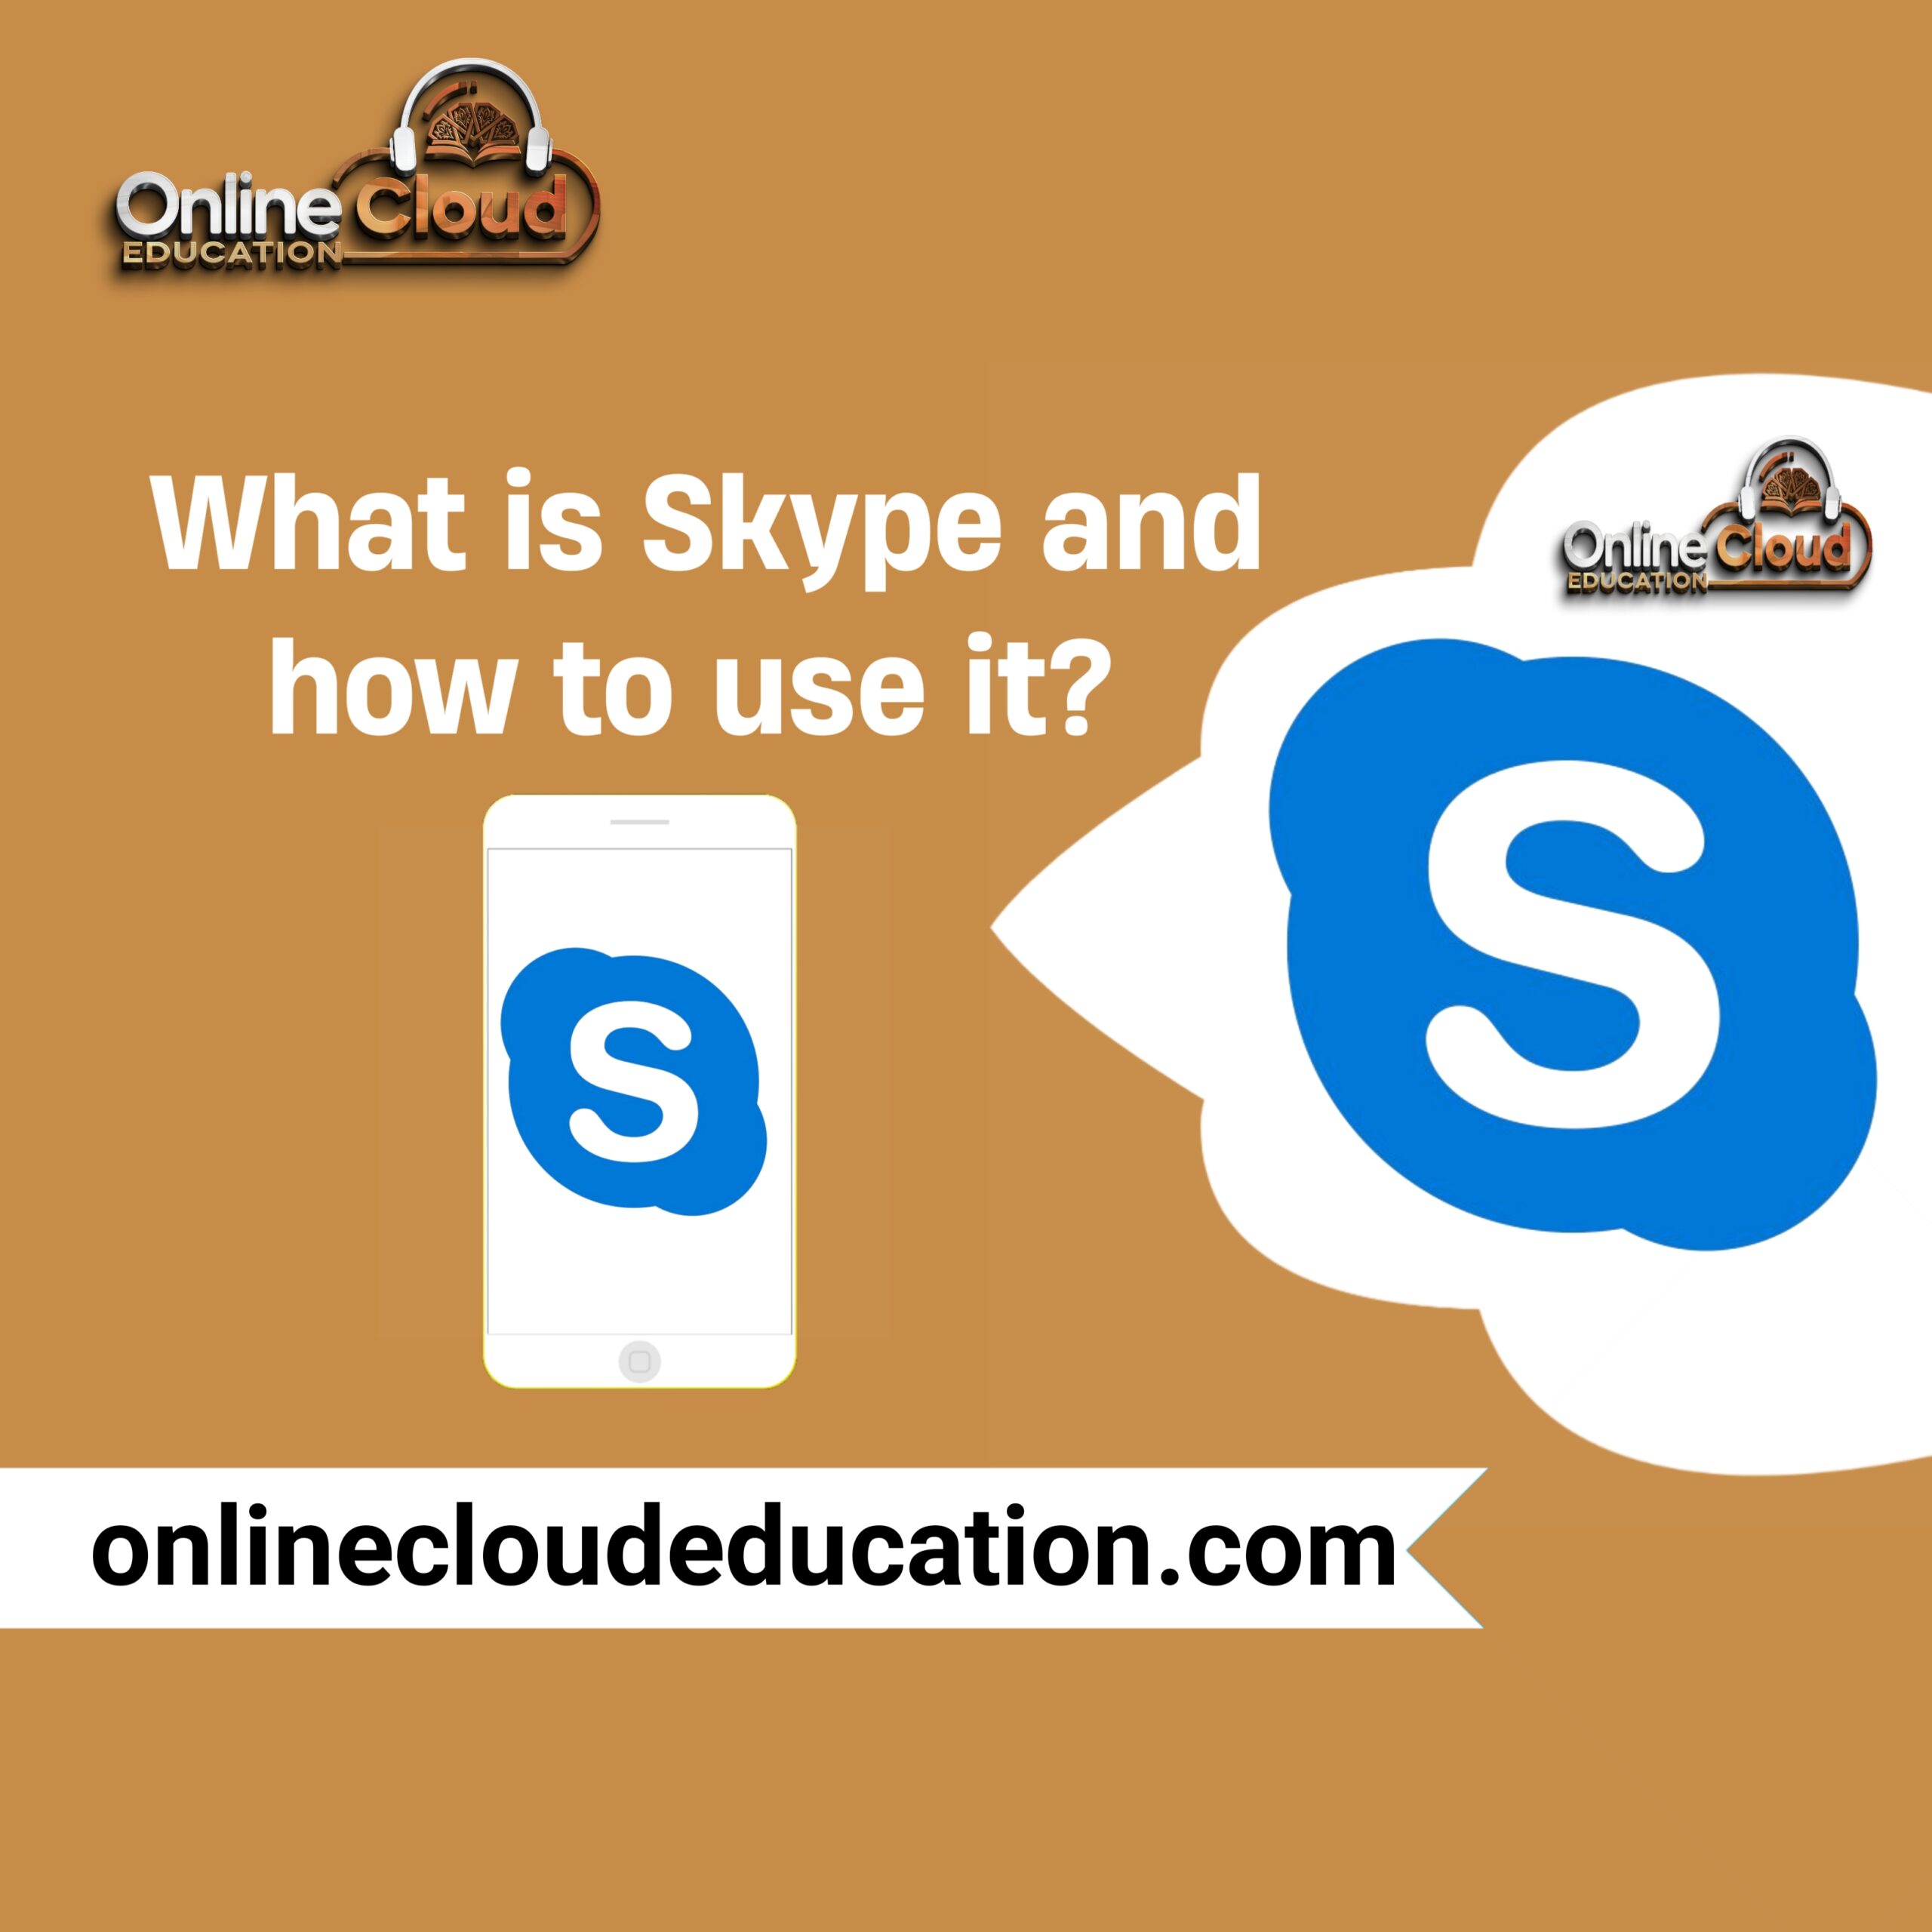 What is skype and how to use it?